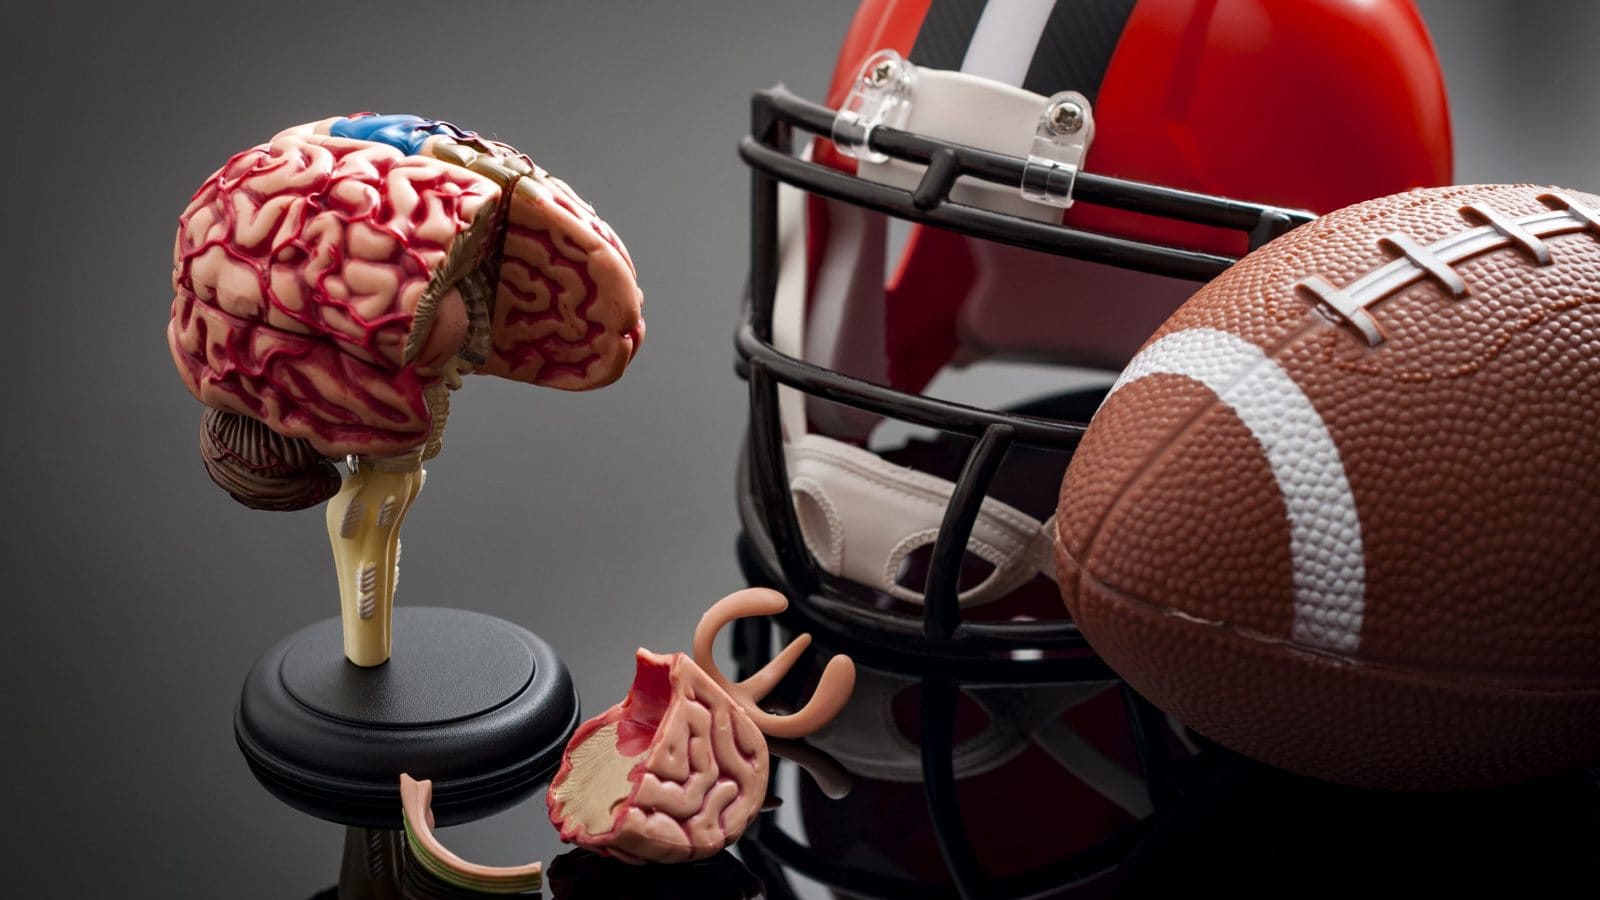 Model of a brain with a helmet and a ball